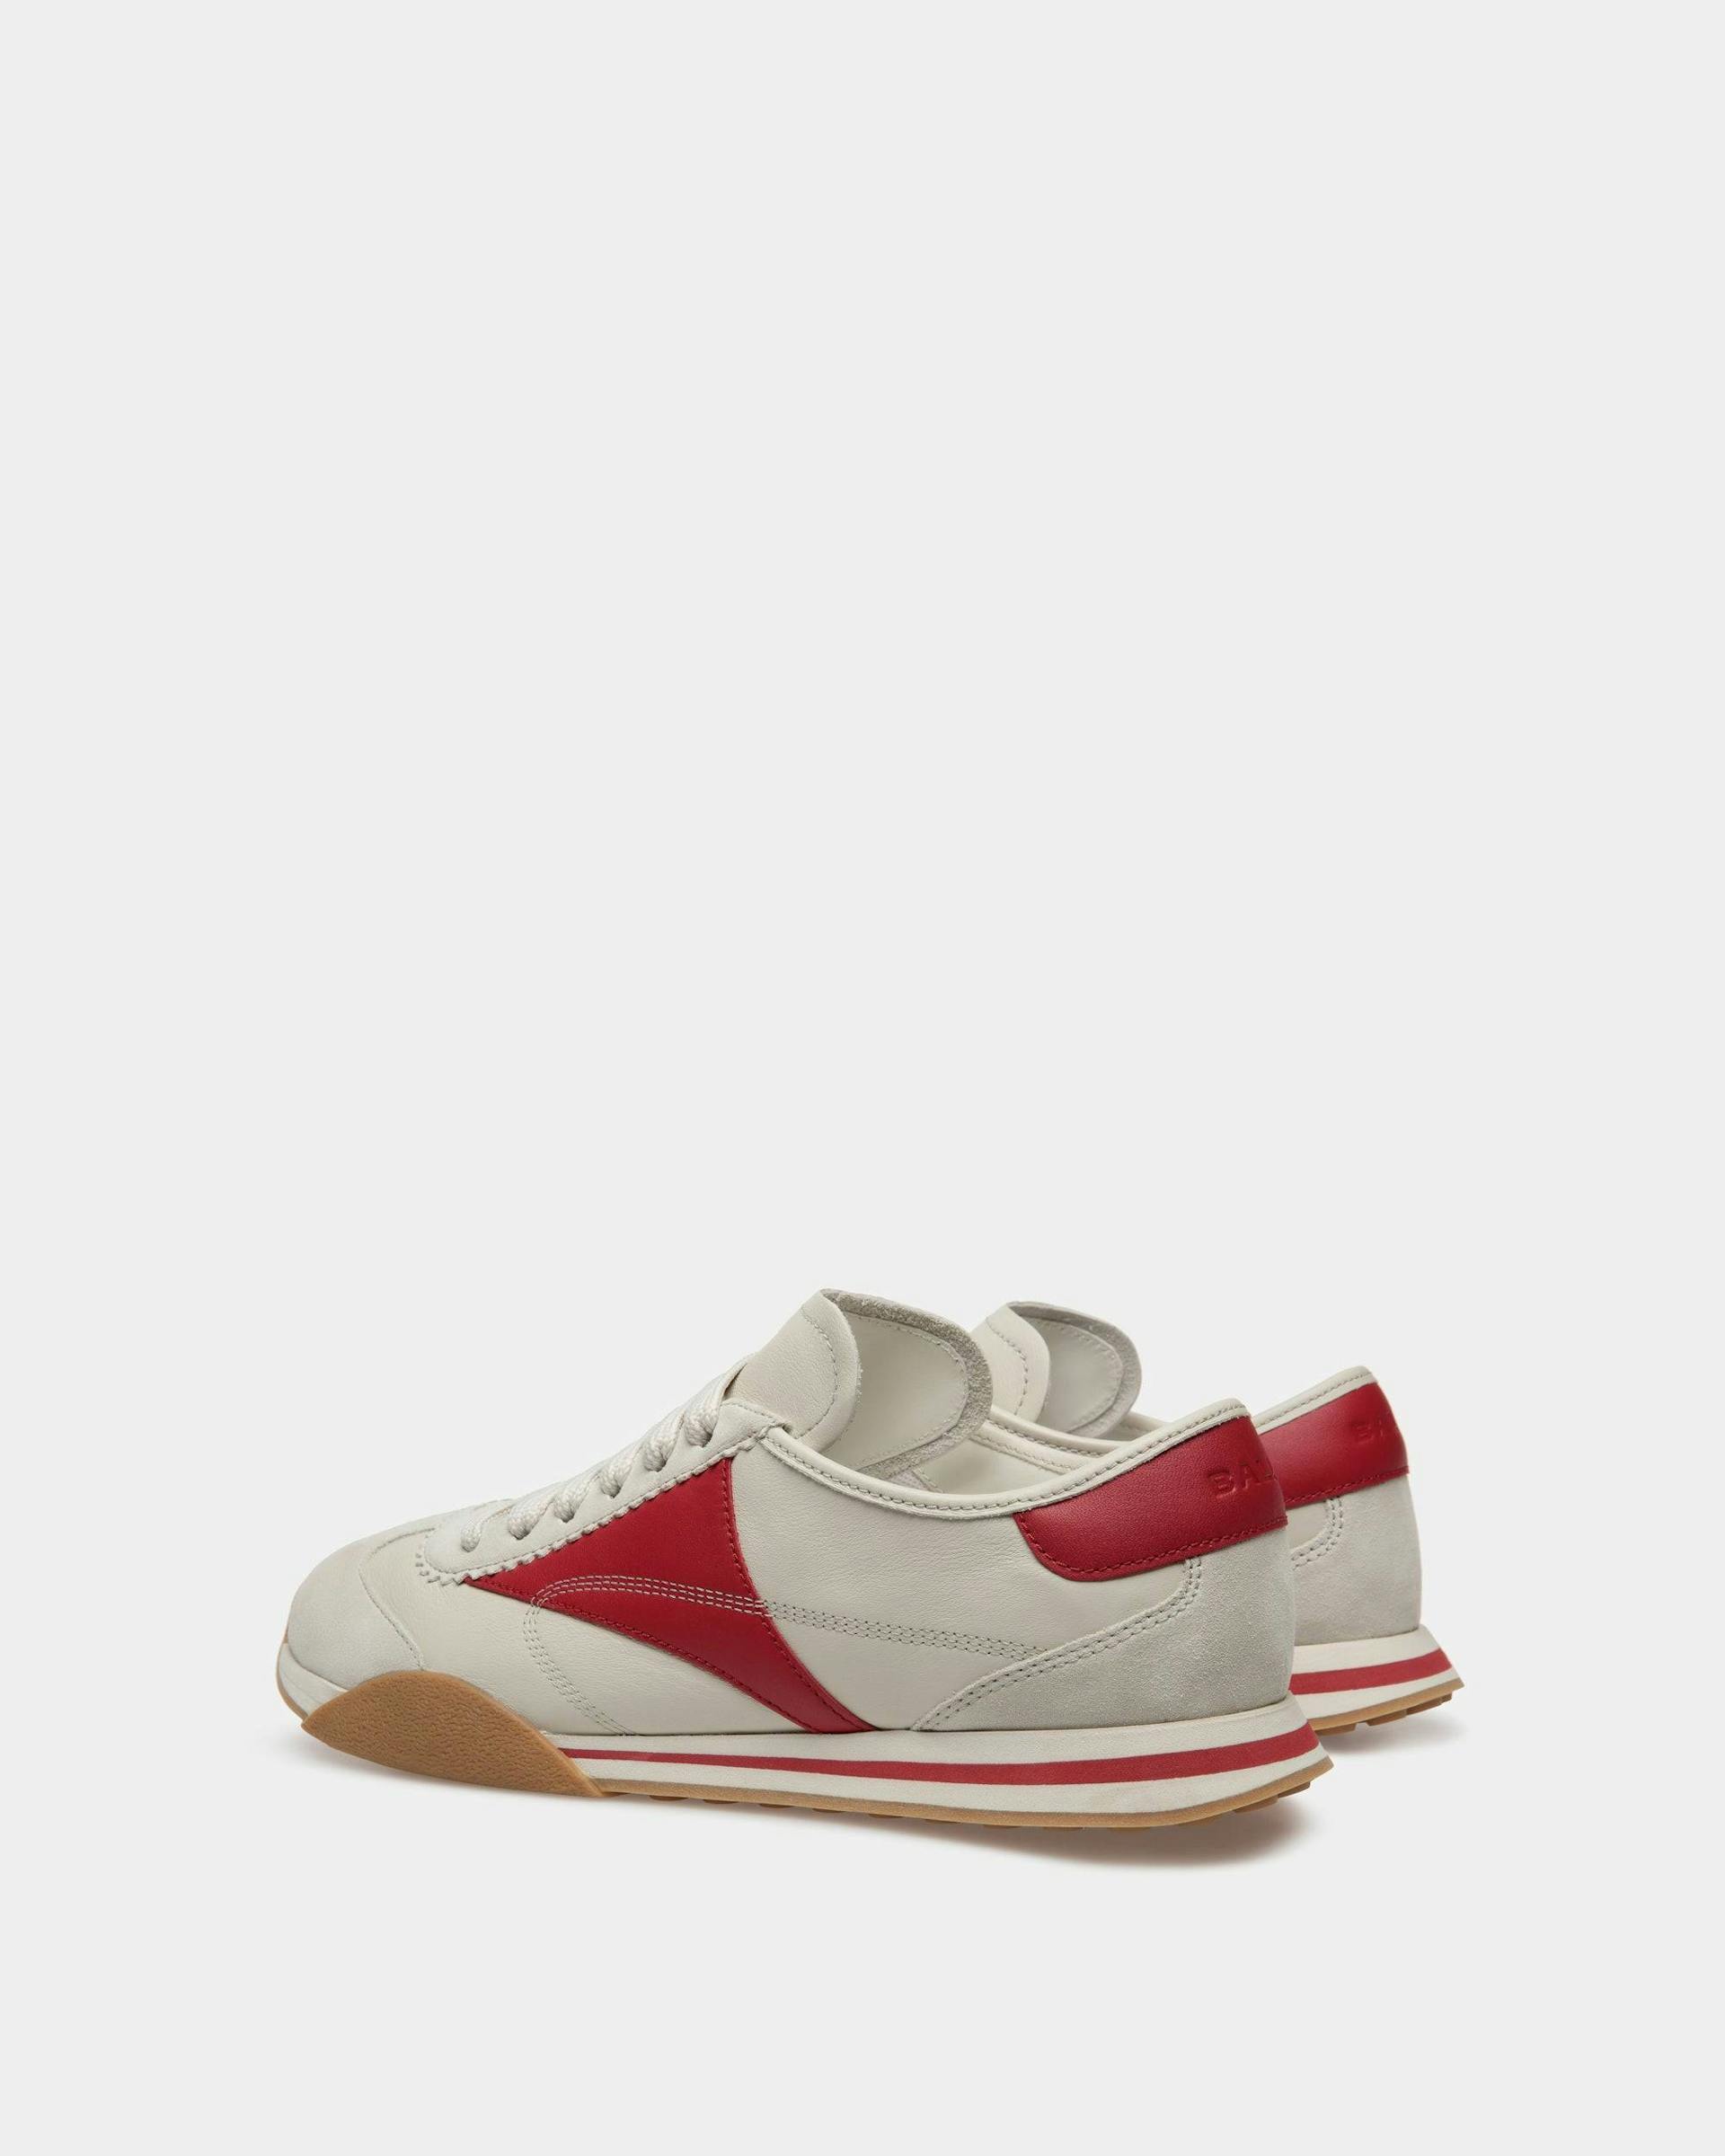 Men's Sussex Sneakers In Dusty White And Deep Ruby Leather | Bally | Still Life 3/4 Back